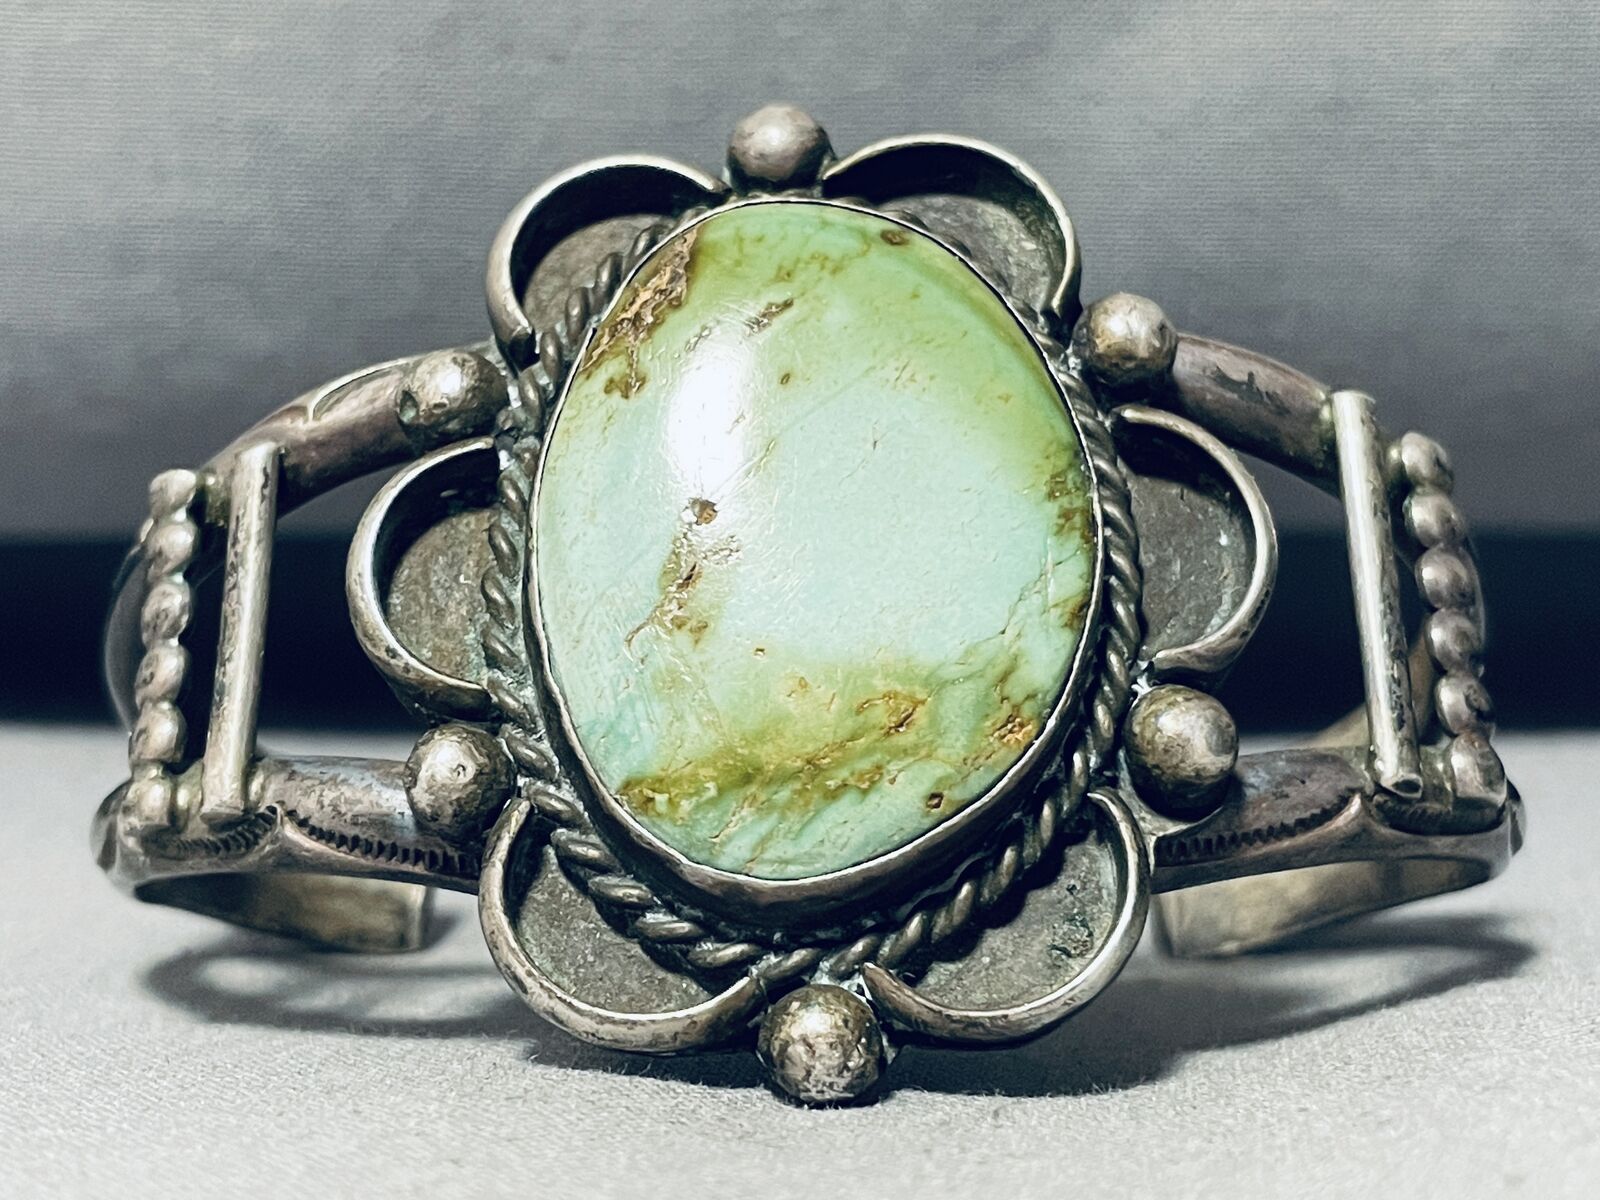 ONE OF FINEST EARLY ROYSTON TURQUOISE VINTAGE NAVAJO STERLING SILVER BRACELET